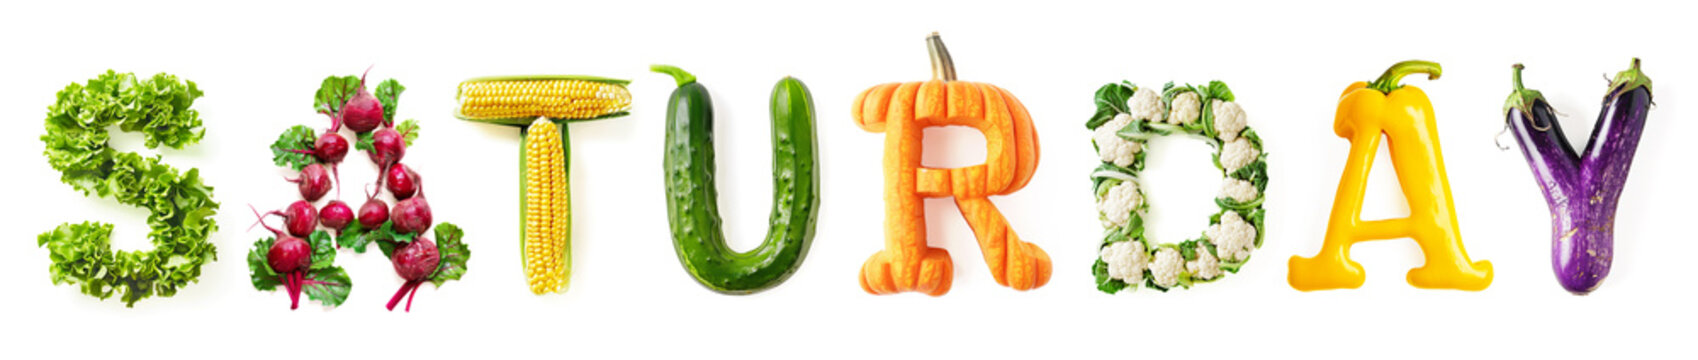 Vegetable Word Saturday (Made of Lettuce, Beetroot, Corn, Cucumber, Pumpkin, Couliflower, Yellow Pepper, Aubergine ) Isolated on White Background